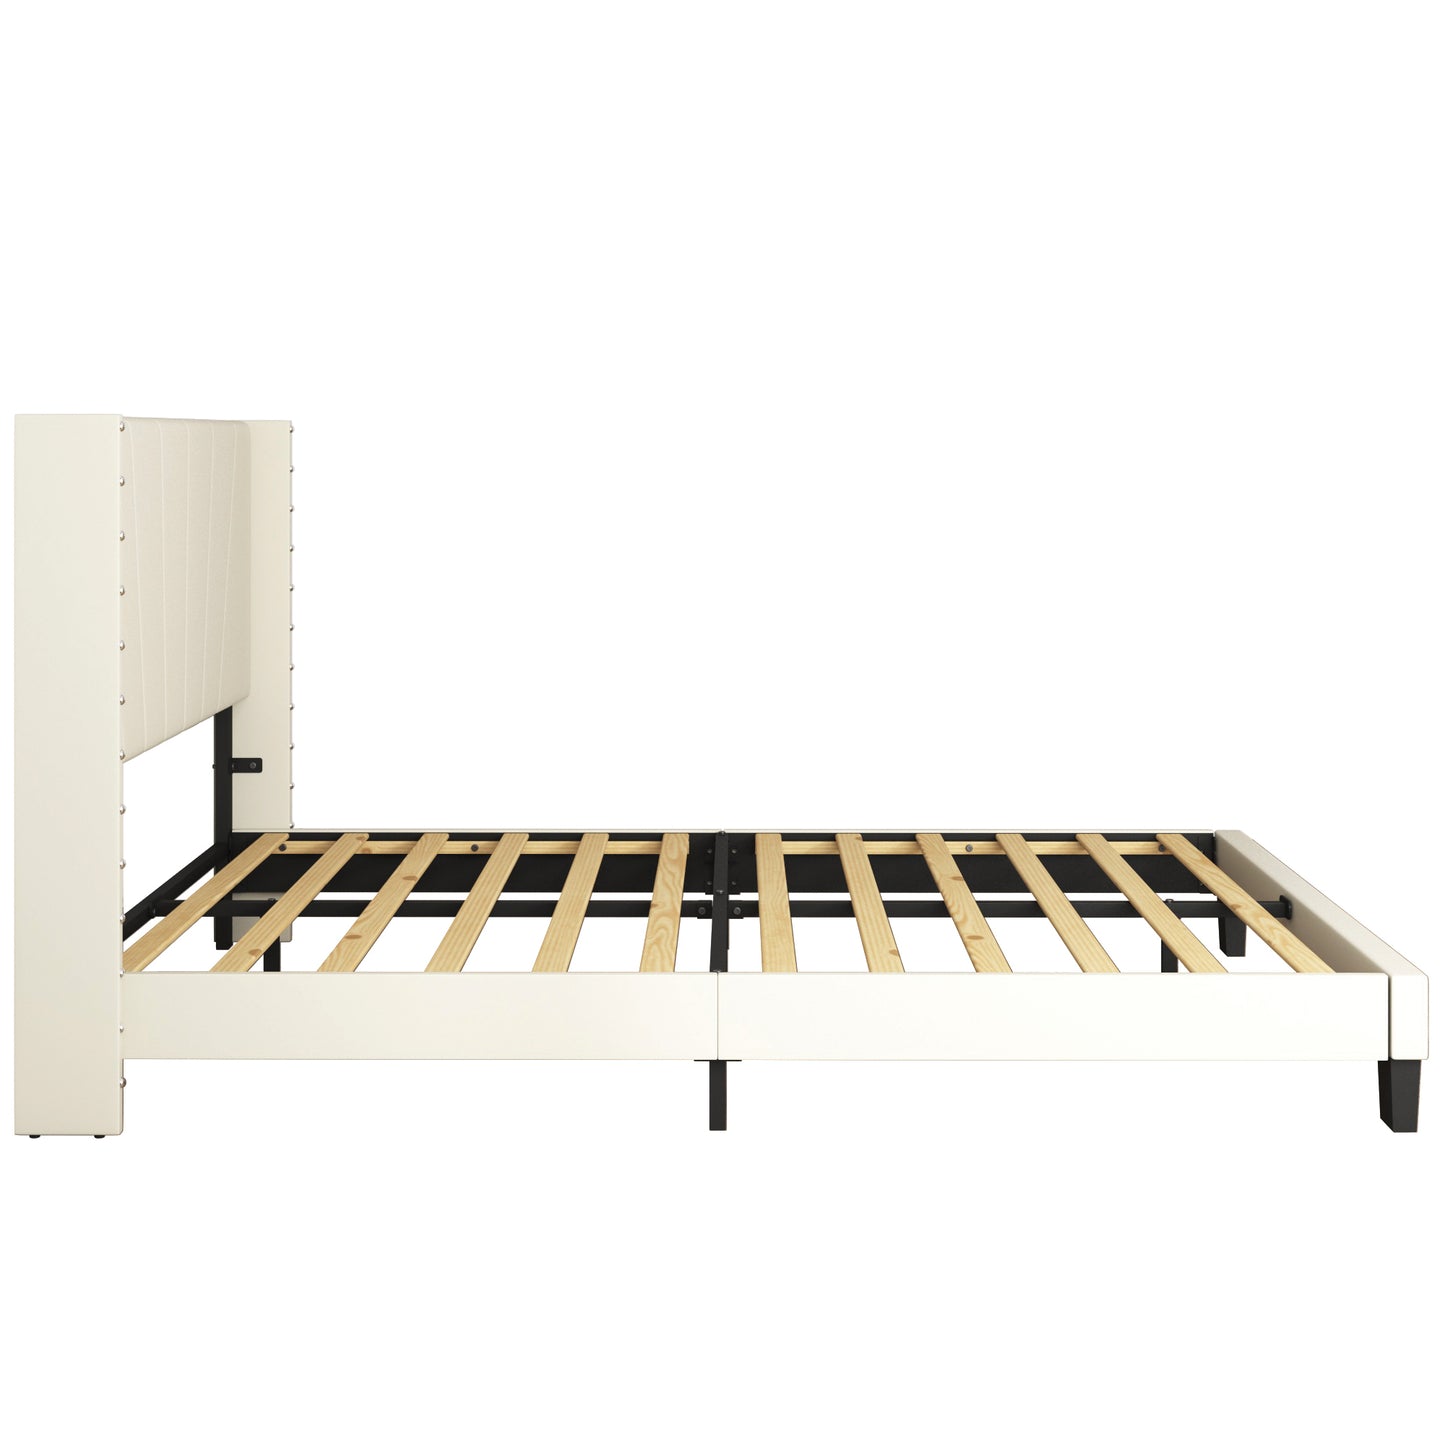 SYNGAR Queen Size Fabric Upholstered Platform Bed Frame with Rivet Wingback Headboard, Mattress Foundation, Metal Frame, Strong Wood Slat Support for Kids Teens Adults, No Box Spring Needed, Beige